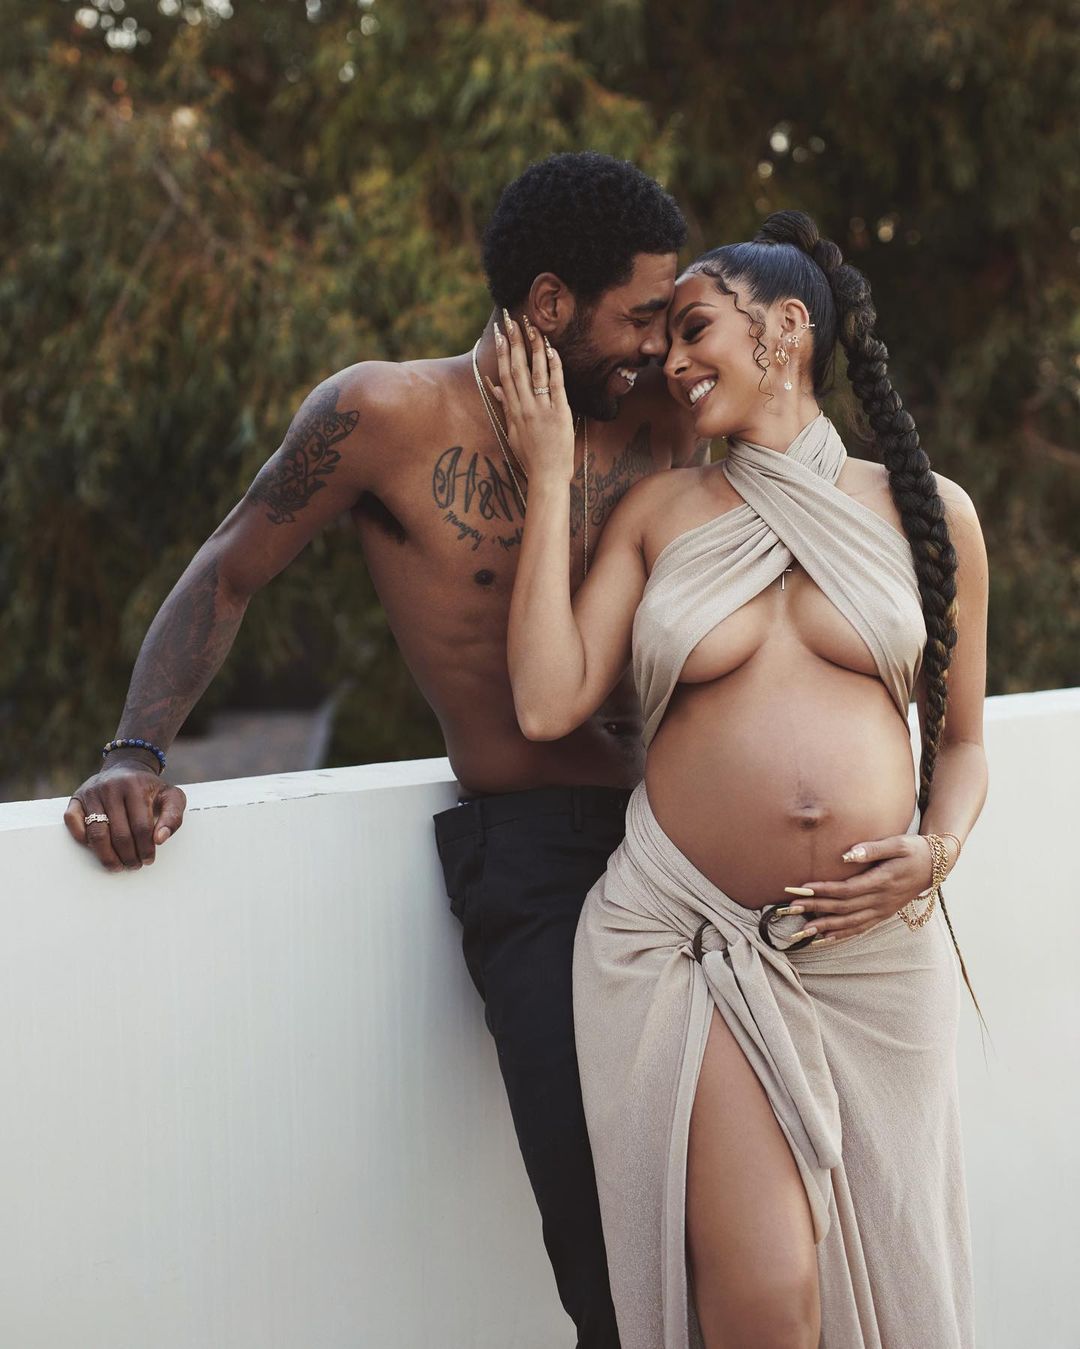 Marlene Wilkerson and Kyrie Irving from her Instagram: “14 months postpartum and it’s my favorite journey yet. A teacher, leader, explorer, observer, and protector. The most gentle father and best friend. We celebrate your presence and impact daily✨ @blaircaldwell captured these beautiful photos almost 2 years ago with 24 hours notice 😫 @hotlikefirre came through with the last minute beat and @hair.byimani__ got my hair together. So grateful this last minute shoot came together and I am about to post these individually because, art by Blair, love by US💛 💁🏽‍♀️✨” 